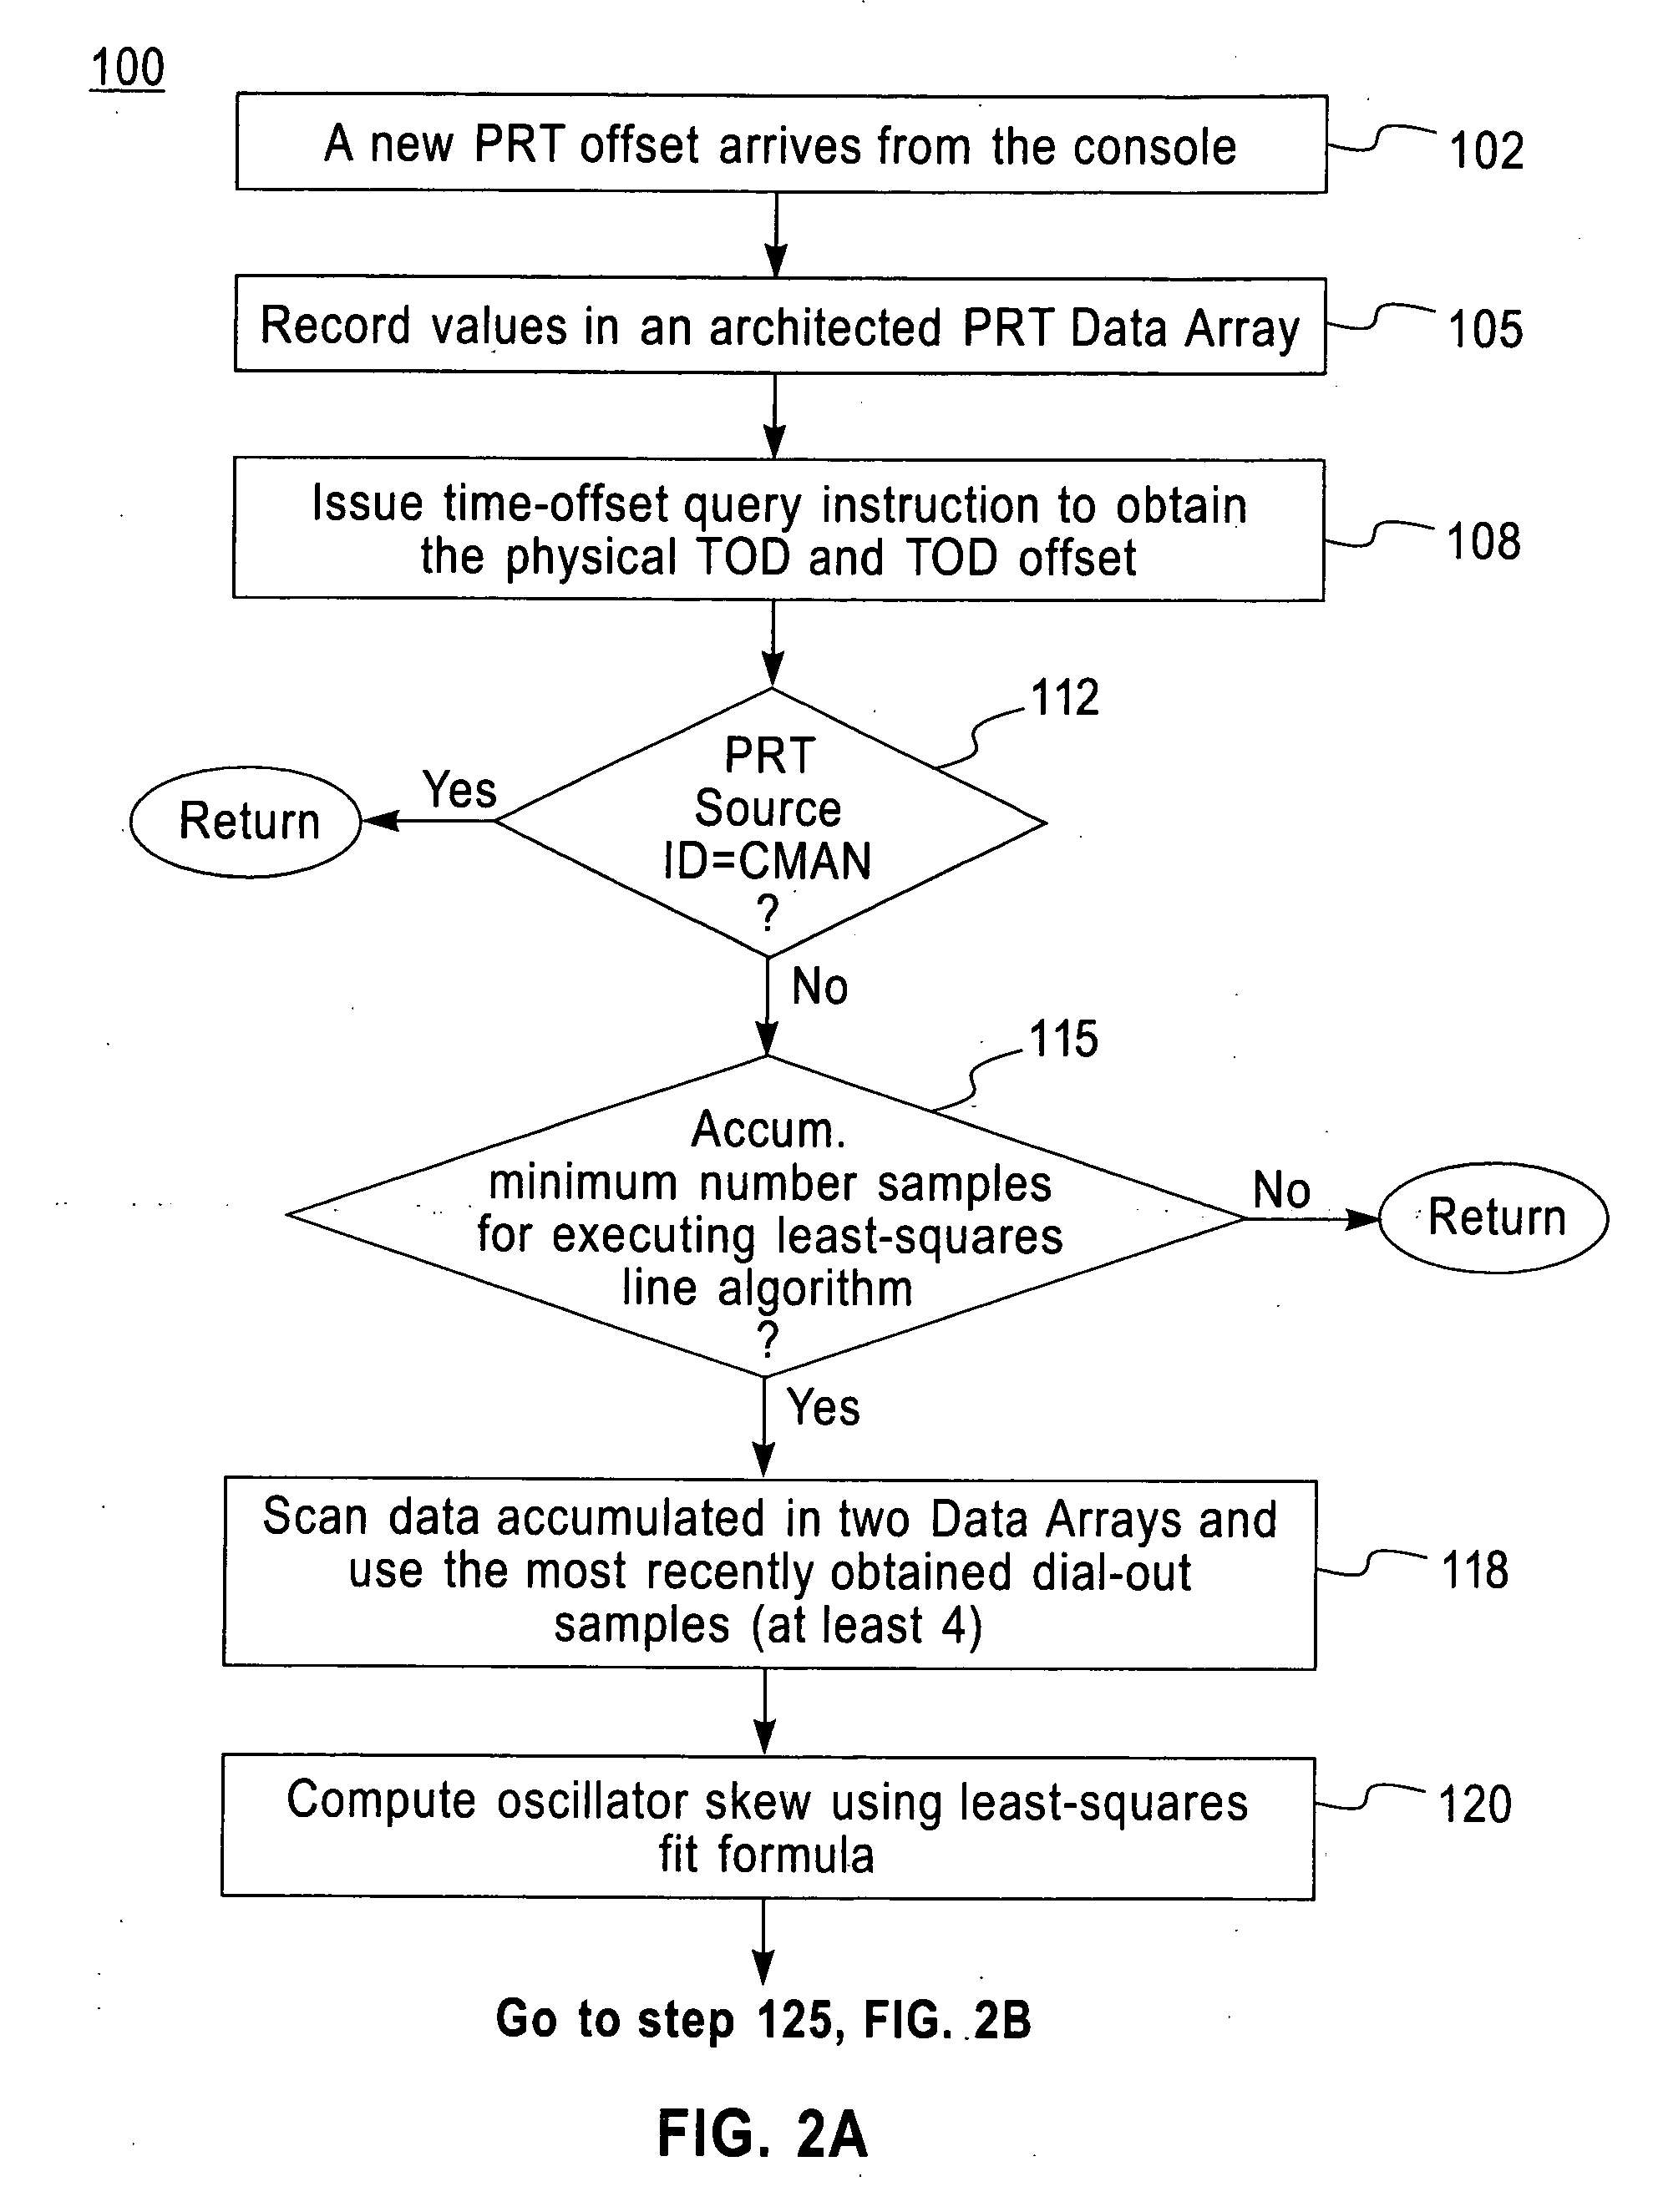 System and method for calibrating a tod clock